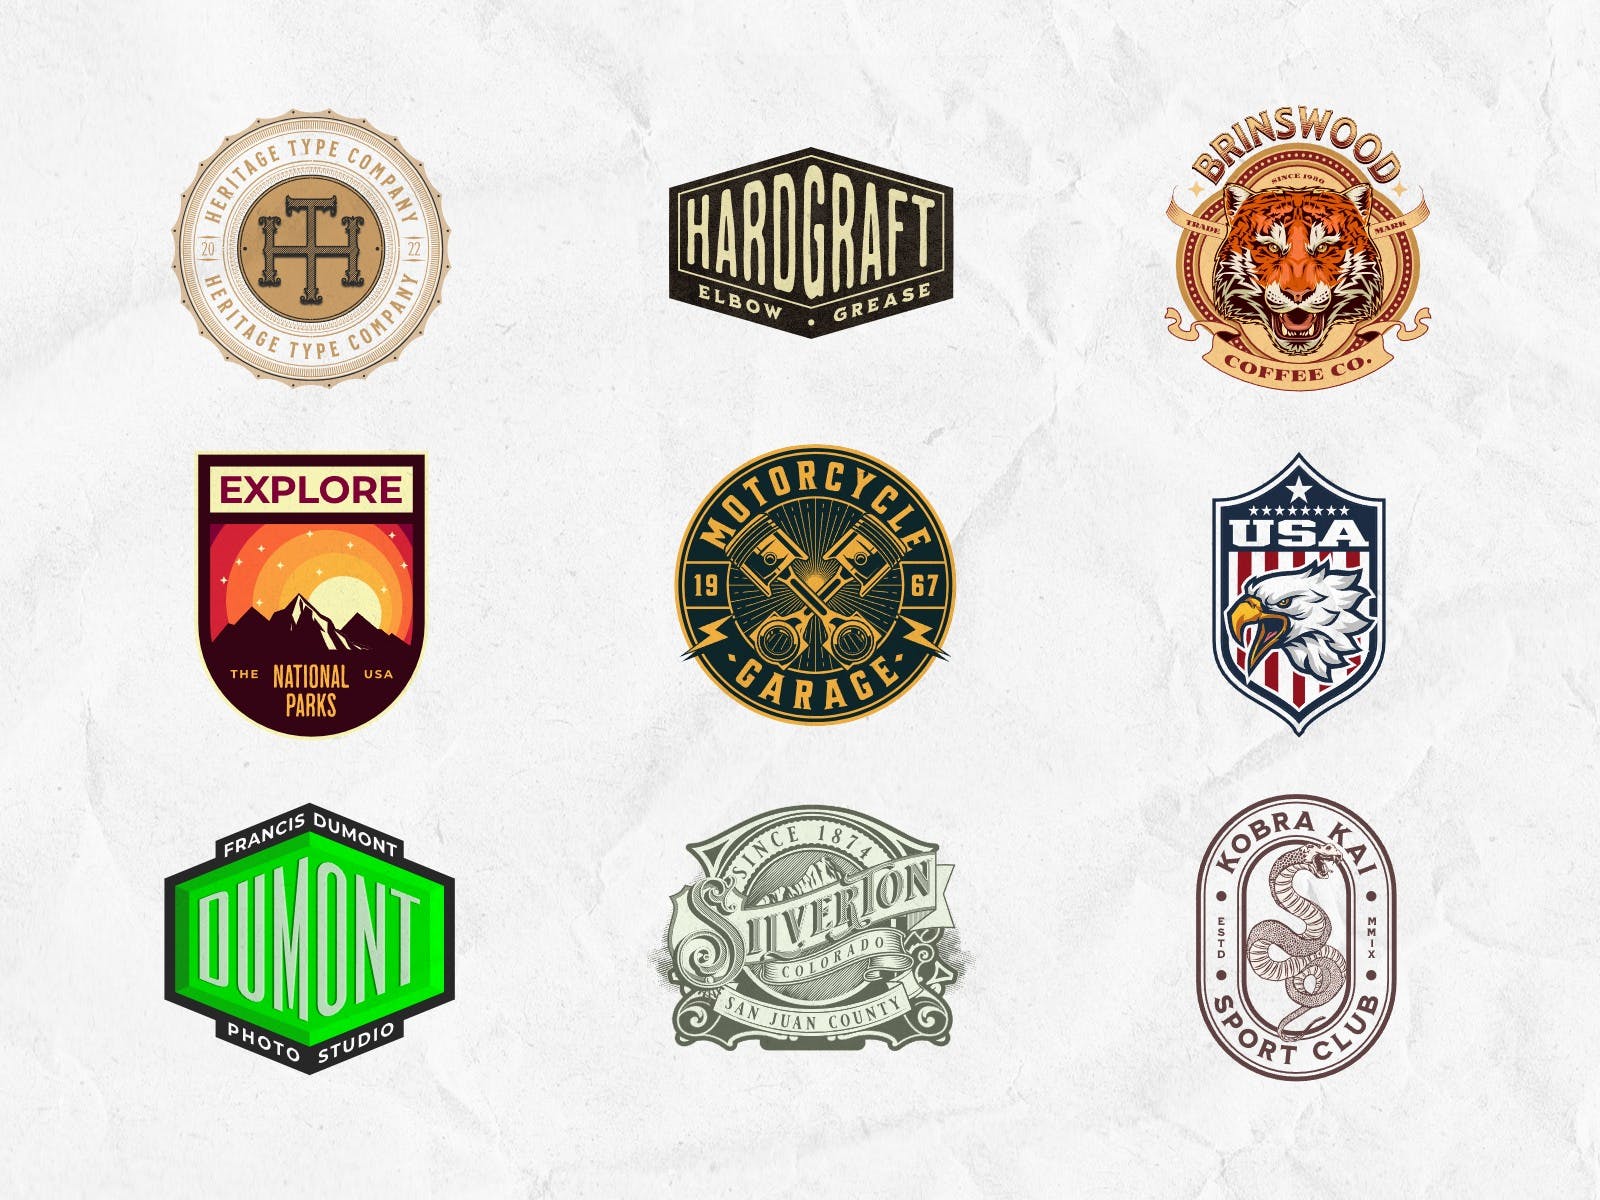 A collection of Kittl's top badge logos representing various industries and styles